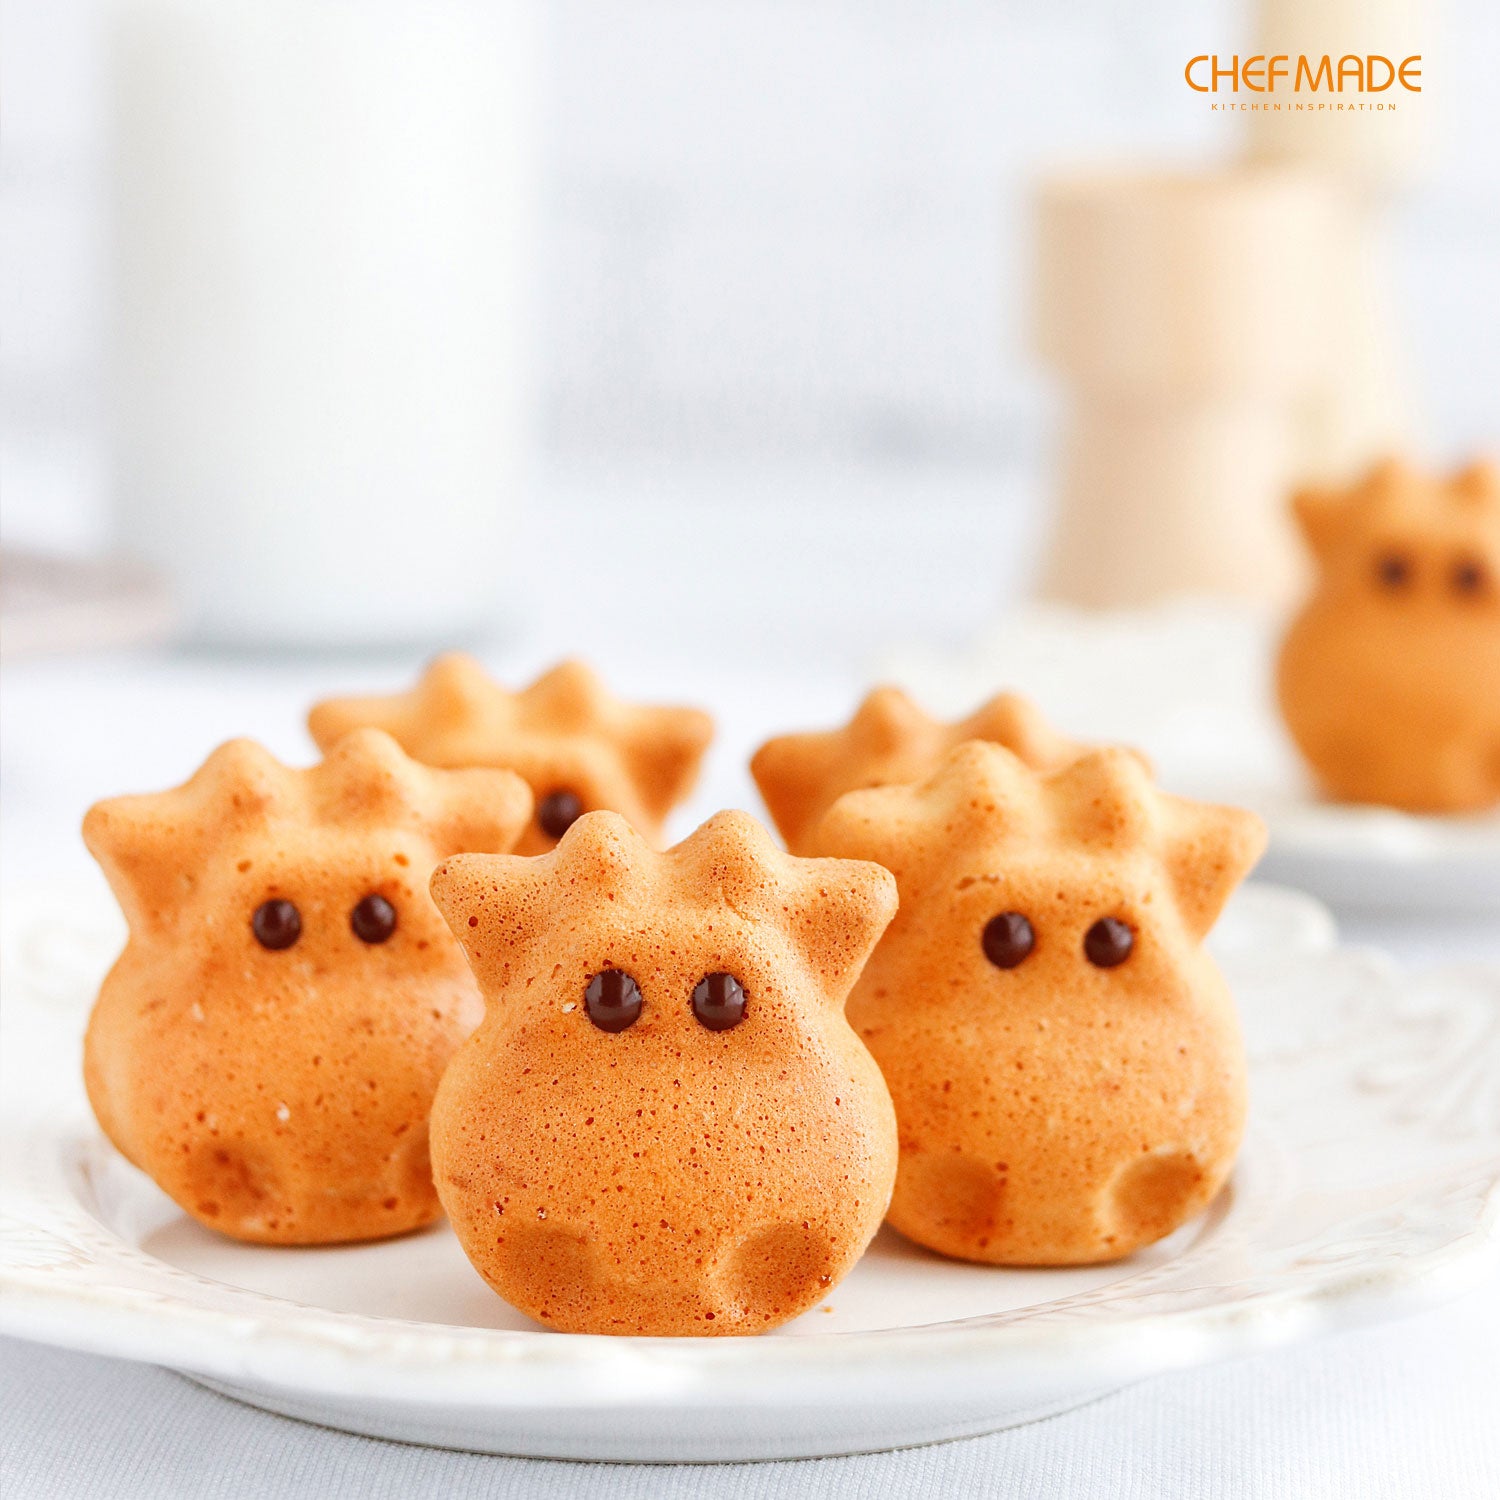 Cow-Shaped Cake Pan 12 Well - CHEFMADE official store